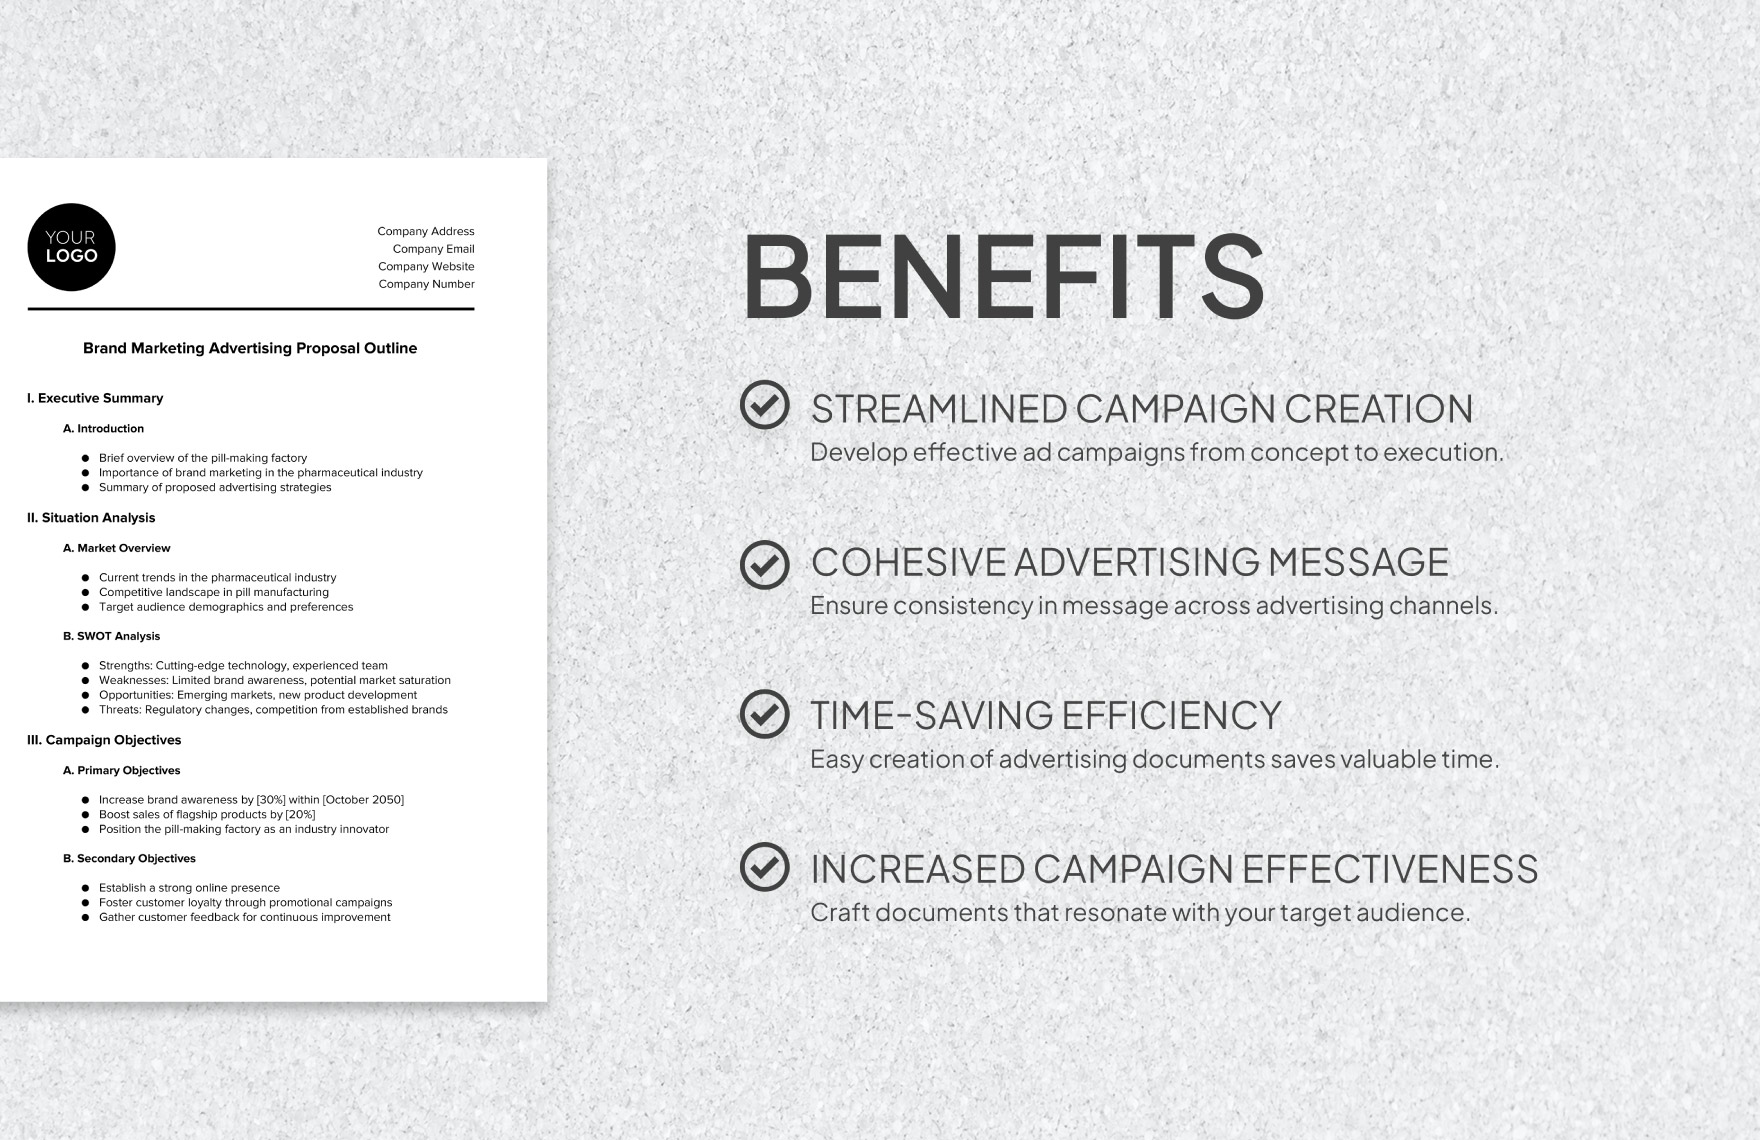 Brand Marketing Advertising Proposal Outline Template